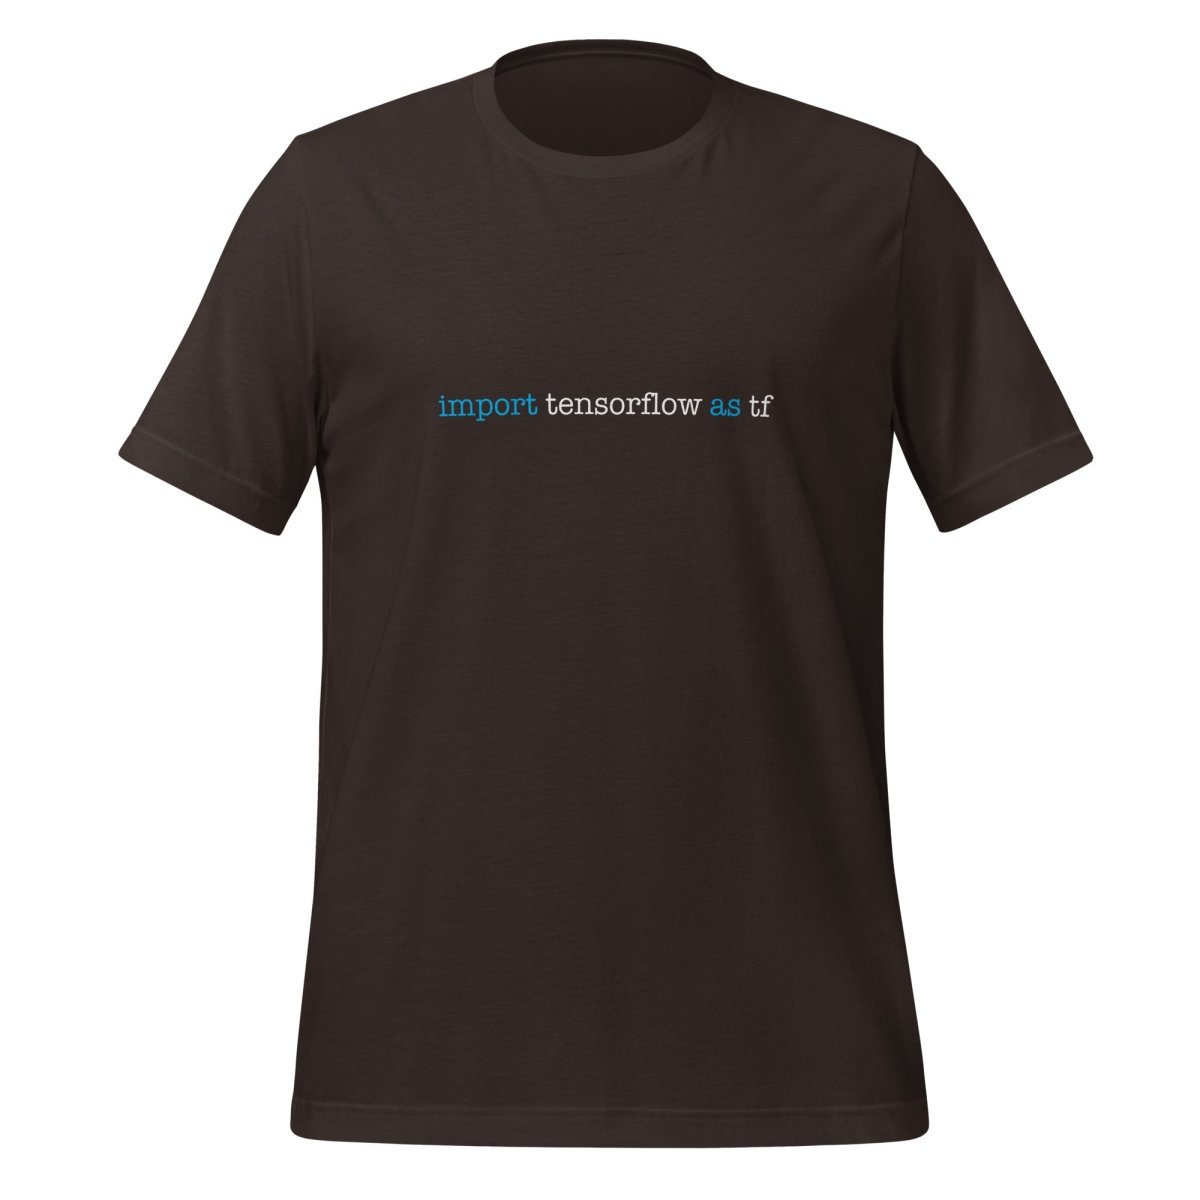 import tensorflow as tf T - Shirt 1 (unisex) - Brown - AI Store